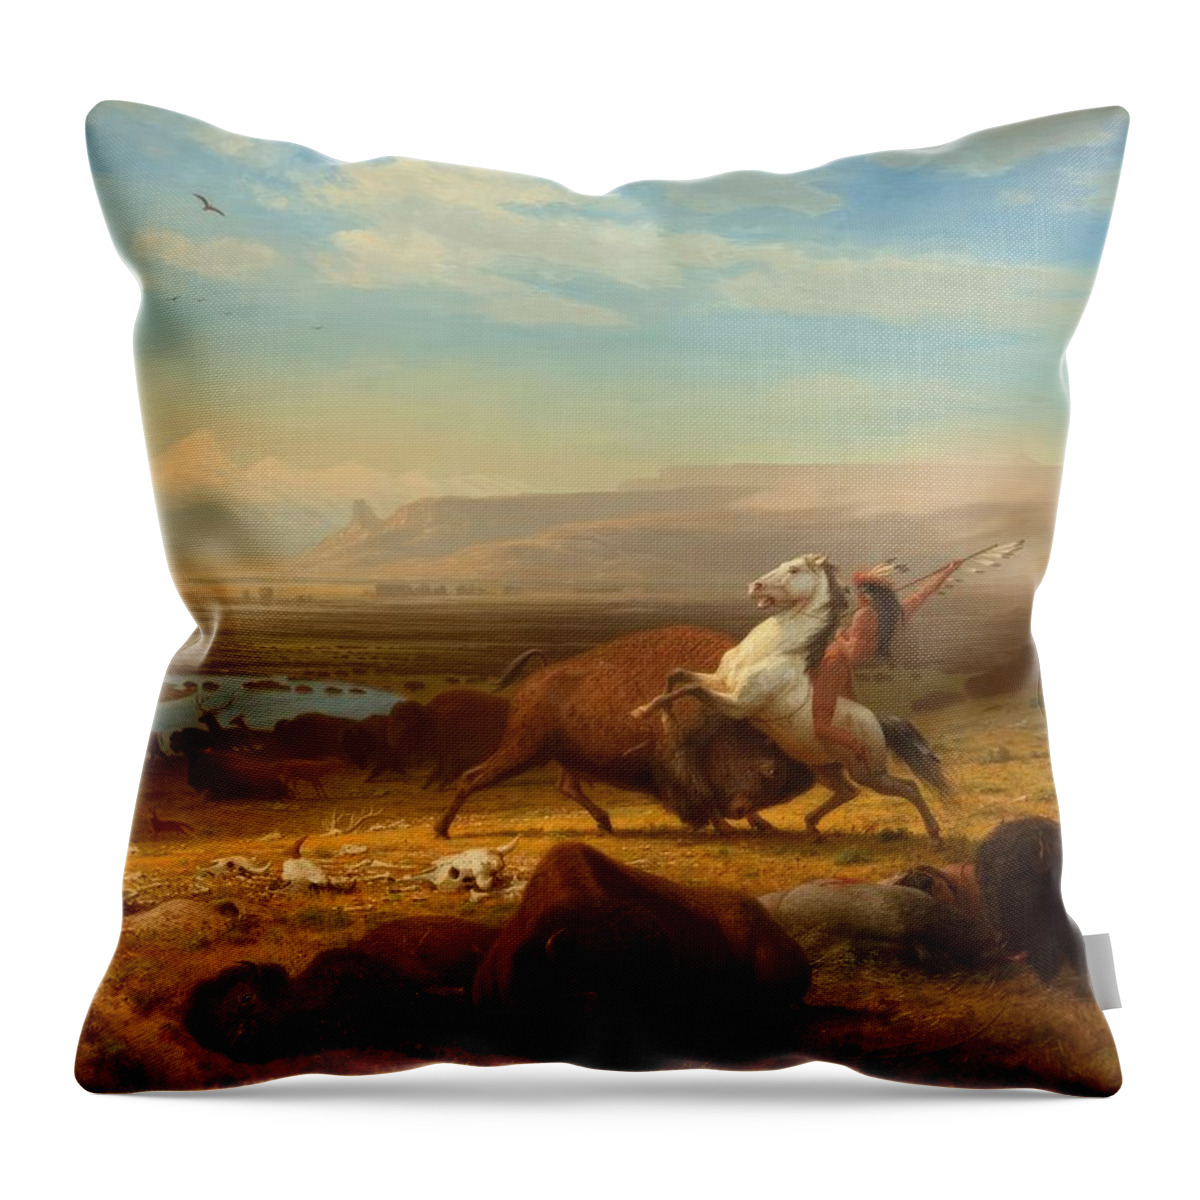 Last Throw Pillow featuring the painting The Last Of The Buffalo by Albert Bierstadt by Mango Art